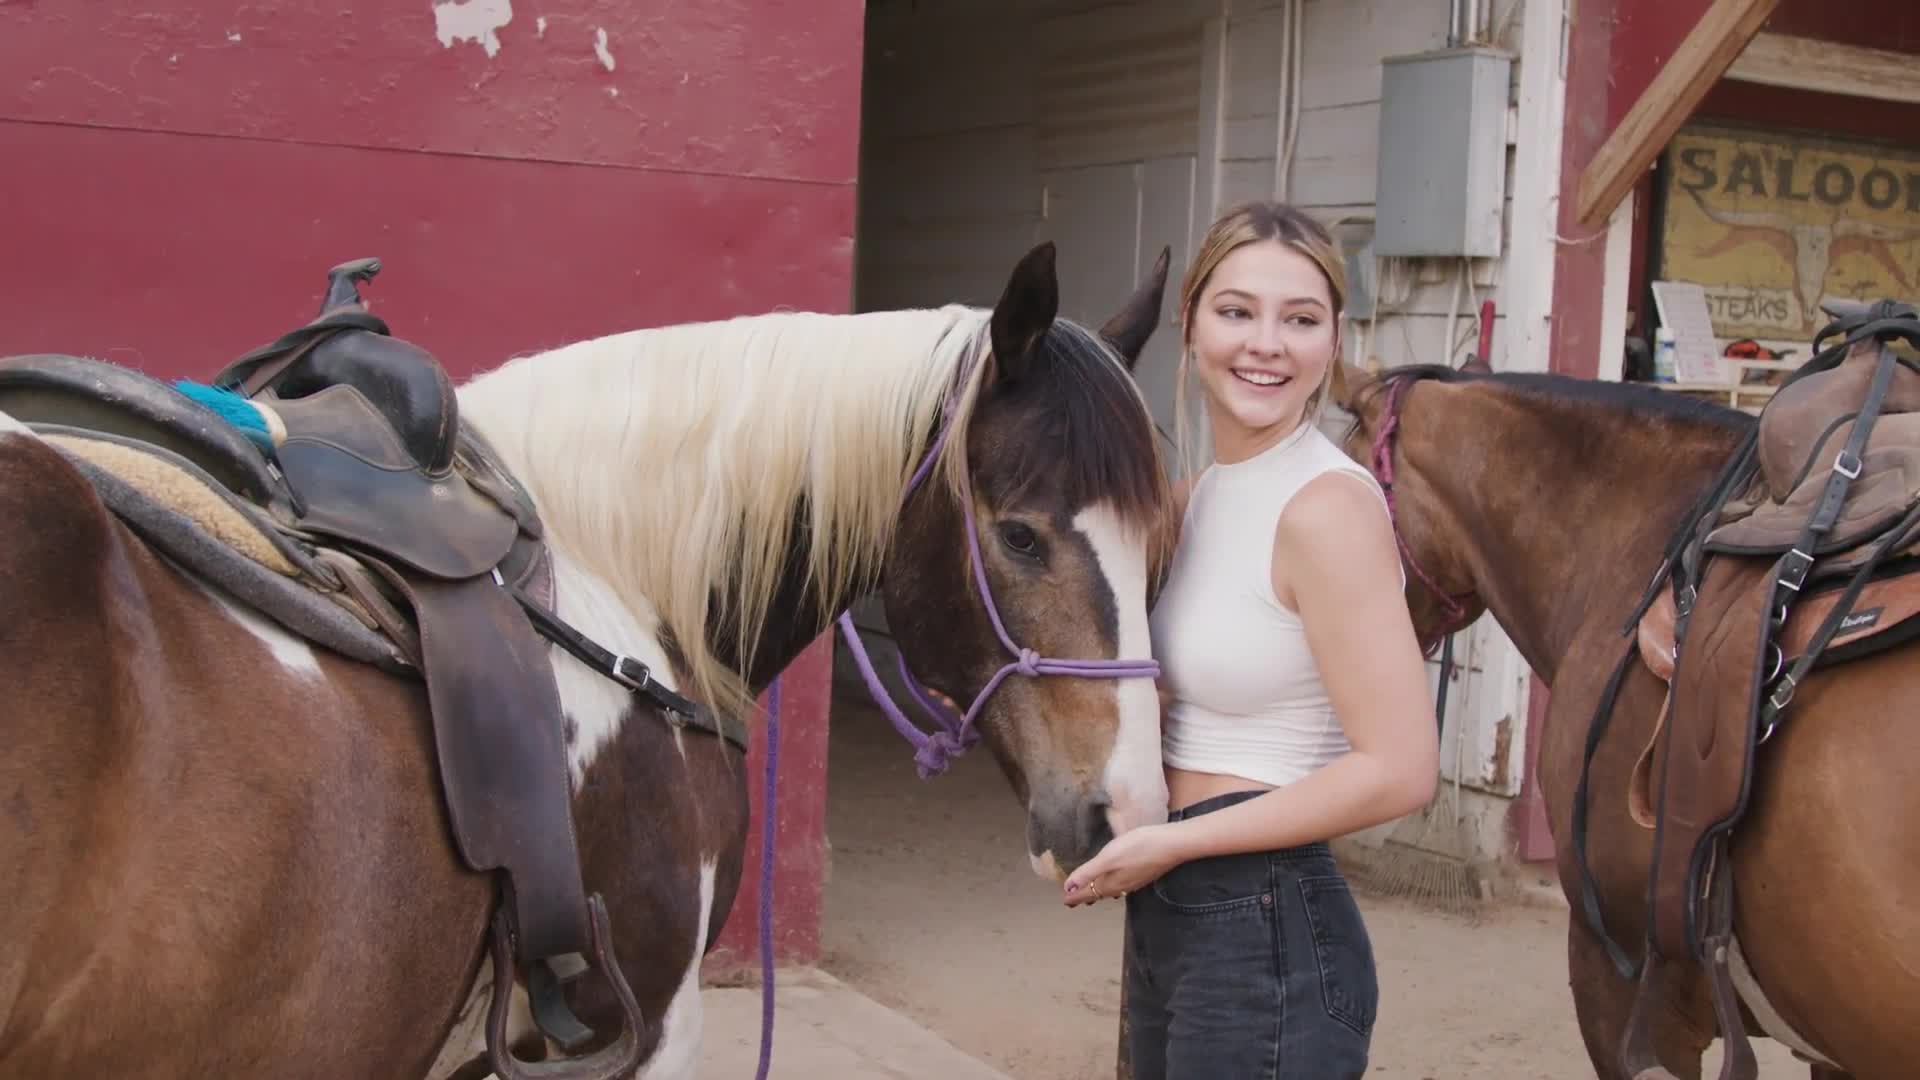 Watch 24 Hours With Madelyn Cline, From the Stables to the Hollywood Sign 24 Hours With Vogue